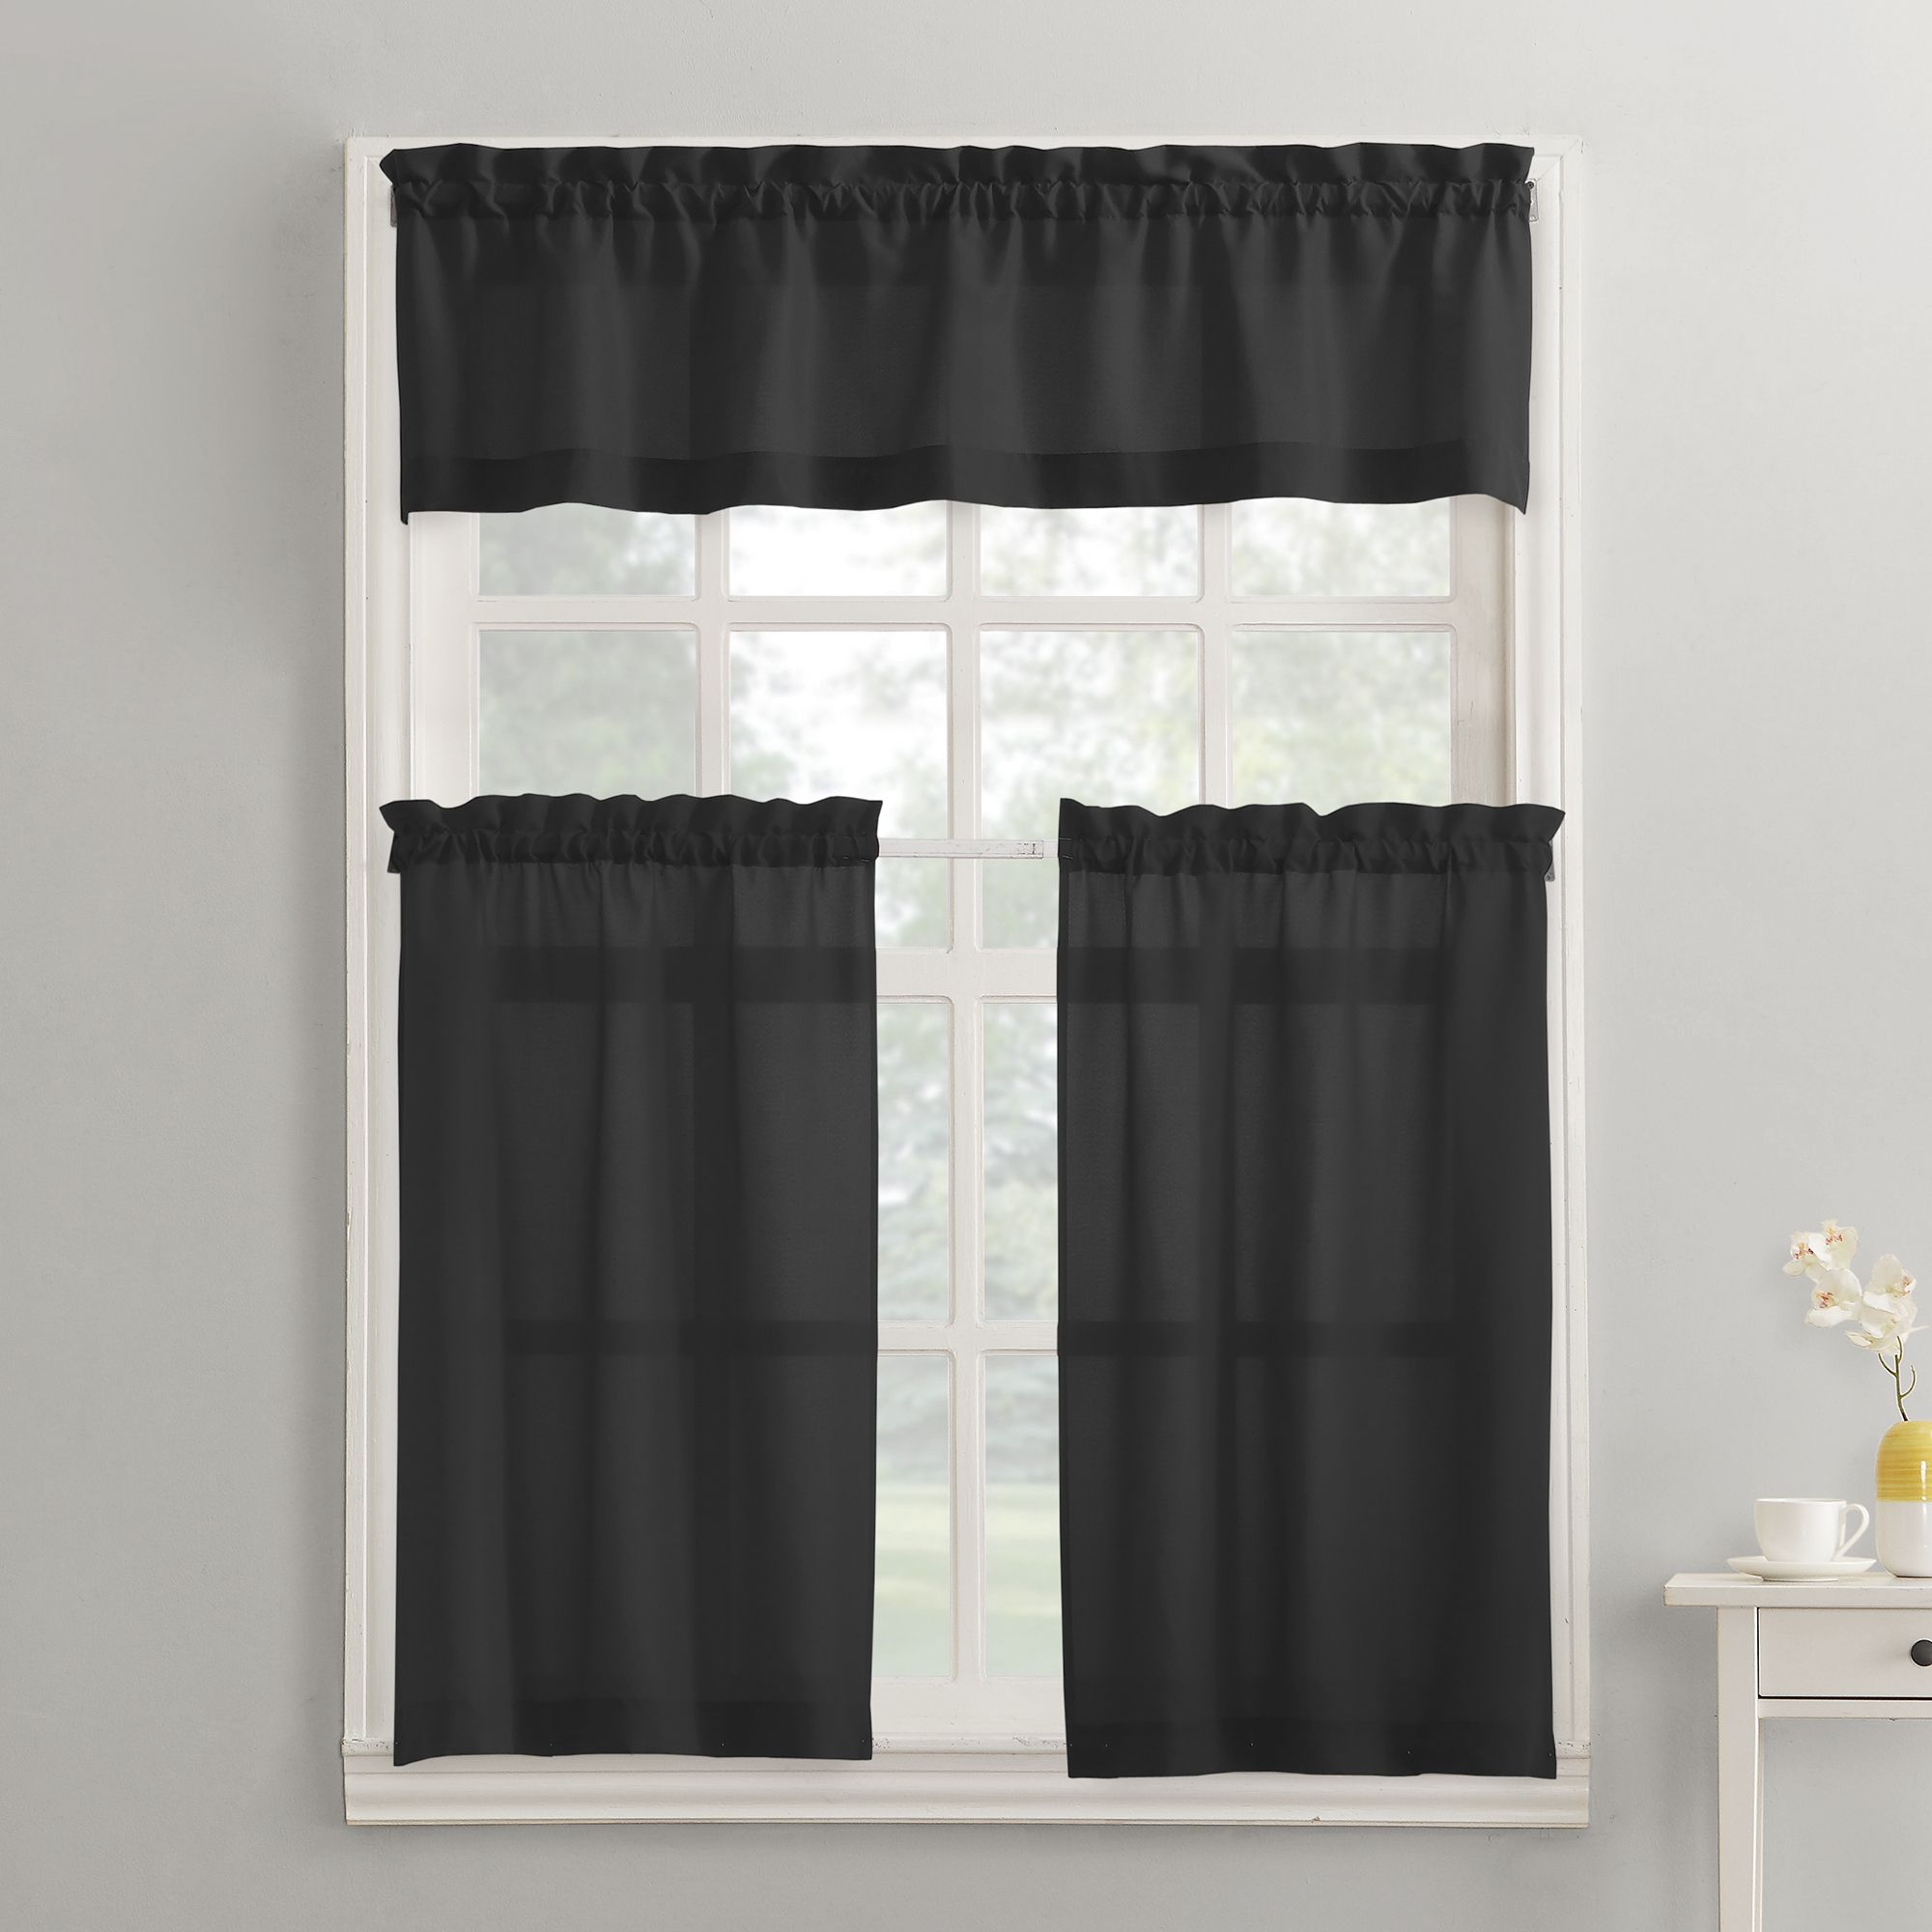 Mainstays Solid 3 Piece Kitchen Curtain Tier And Valance Set Throughout Barnyard Window Curtain Tier Pair And Valance Sets (View 11 of 20)